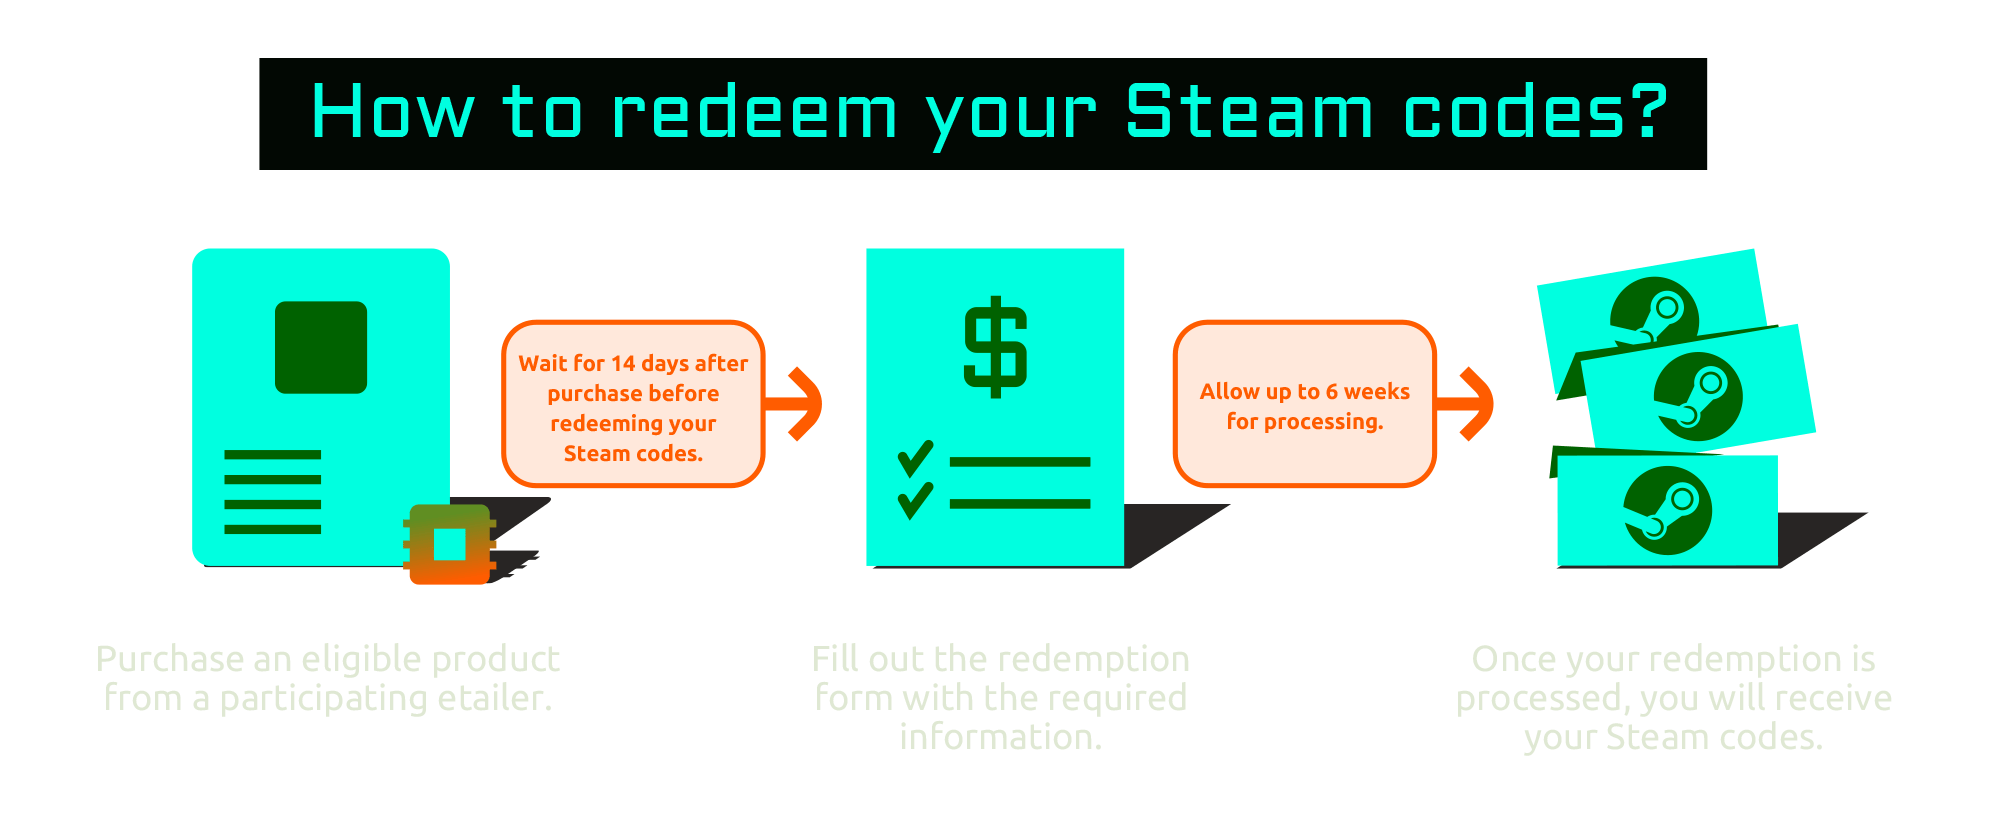 How to redeem your Steam codes?